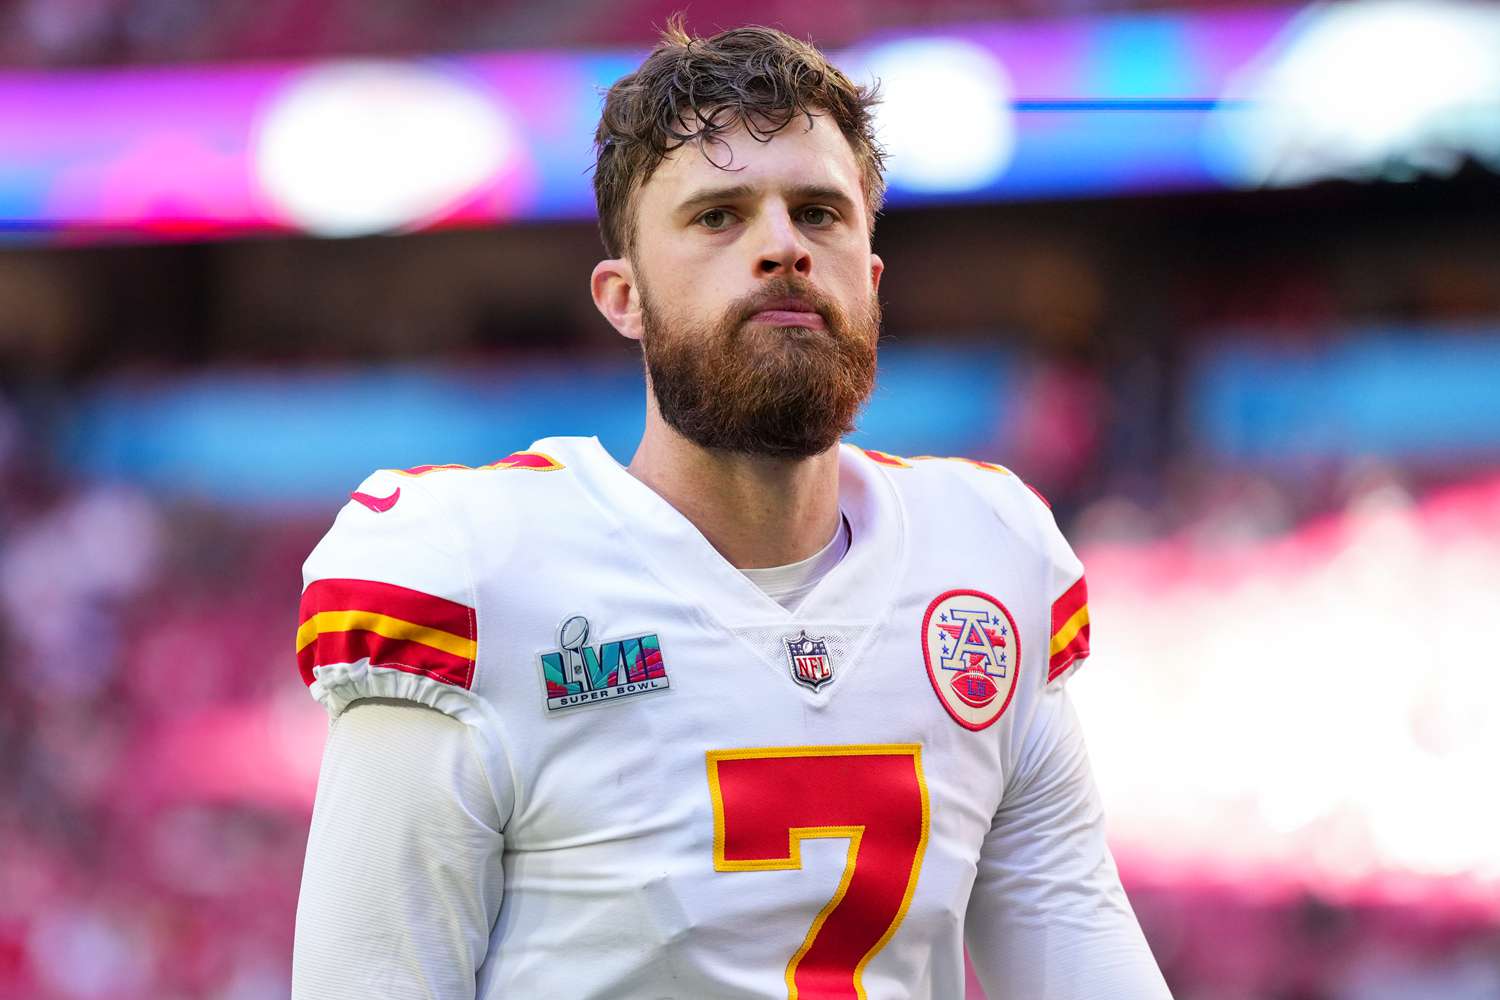 Chiefs' Harrison Butker problem continues to grow amid more outrage with the realization of some words are better left unsaid (The Power of Choosing Words Wisely)"